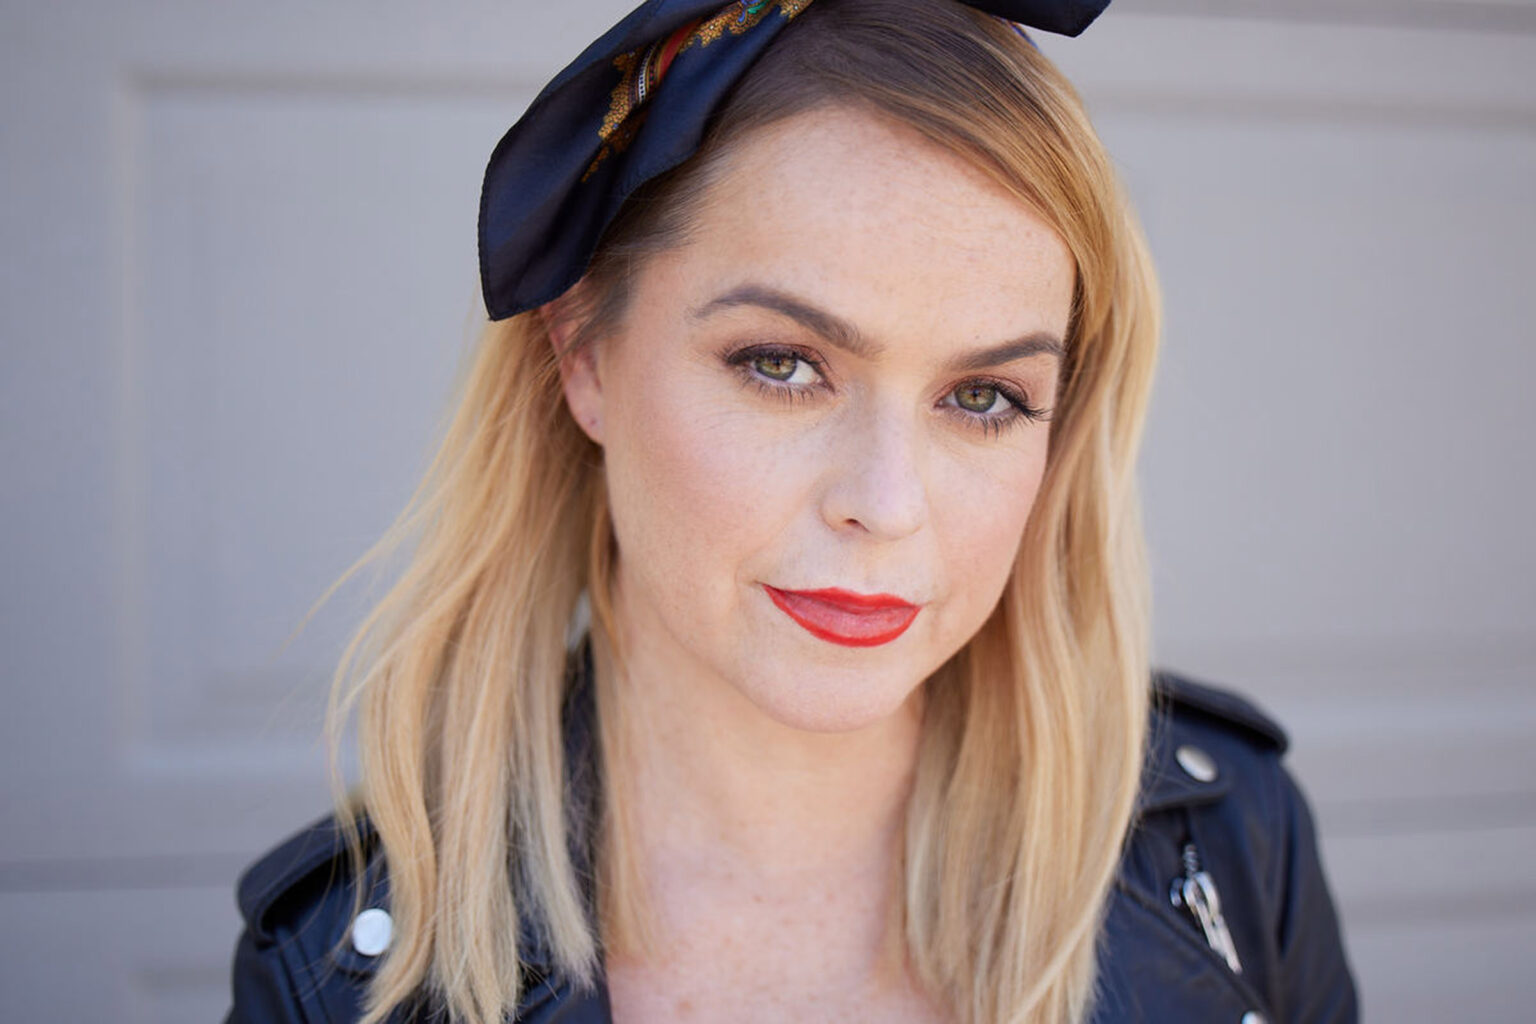 Taryn Manning is an actress and musician who stars in the incendiary new film 'Karen'. Learn more about Manning's impressive career here.